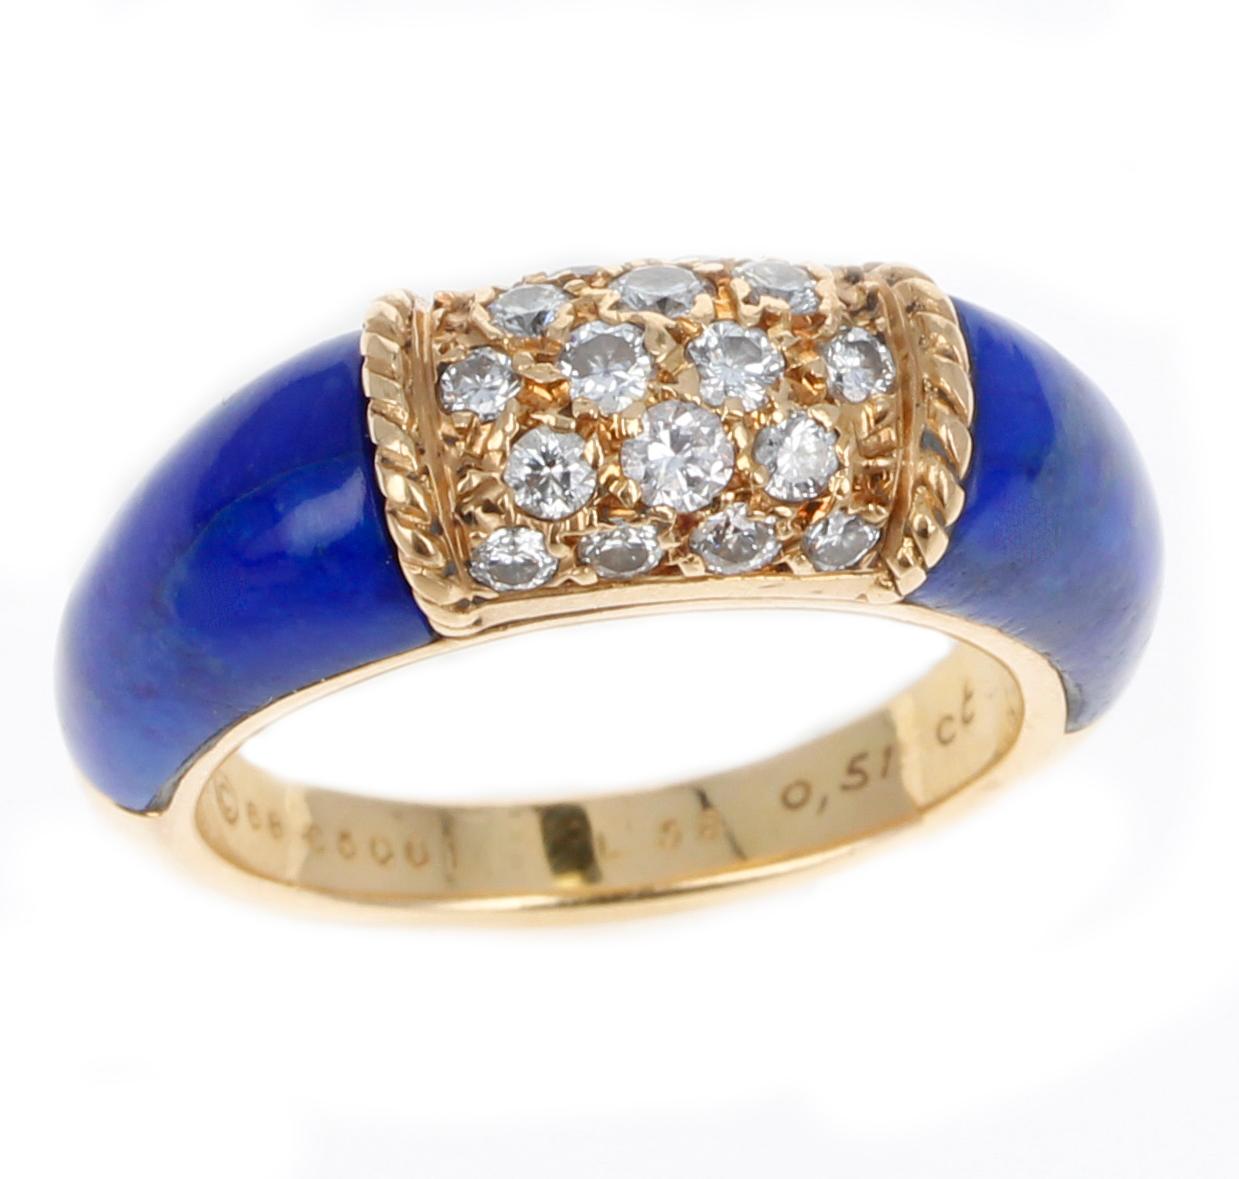 A Van Cleef & Arpels Ring with Two Carved Lapis Inlays and 5 Row Diamond Stacking Philippine Ring made in 18K Yellow Gold. There are 5 rows of diamonds, totaling to 15 round diamonds. The total weight is 7.68 grams. 

SKU: 1463-BAJJP